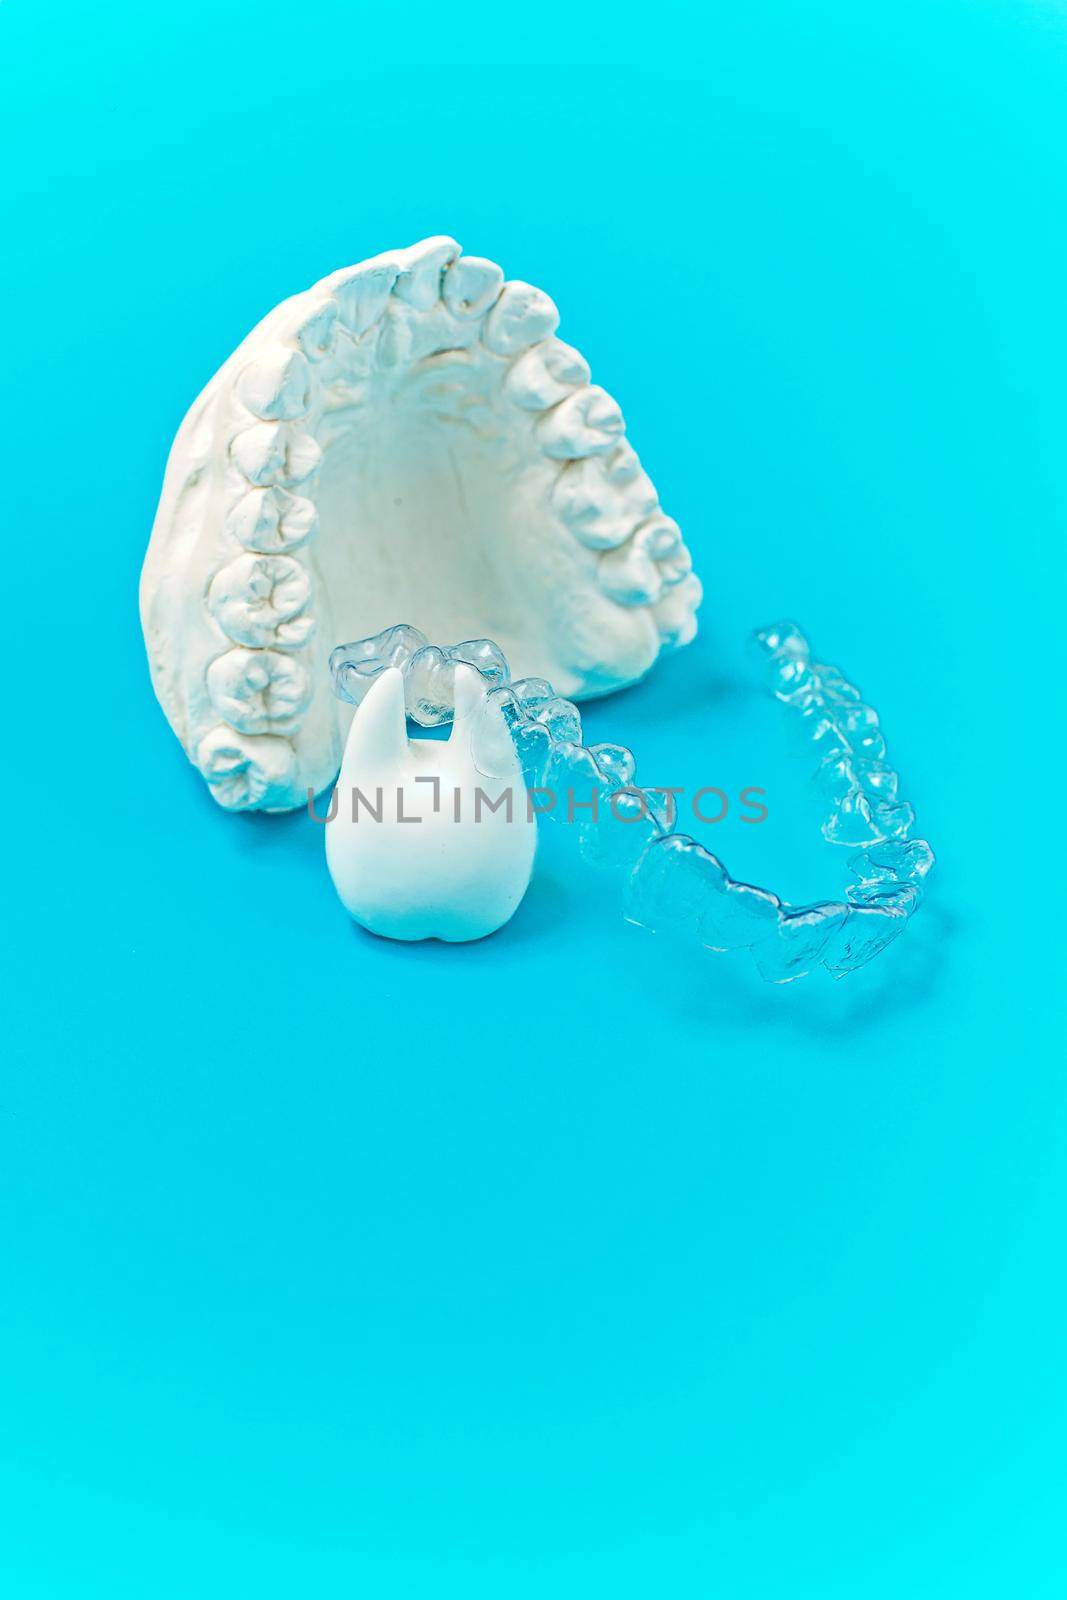 Orthodontic dental theme on blue background. Transparent invisible dental aligners or braces aplicable for an orthodontic dental treatment